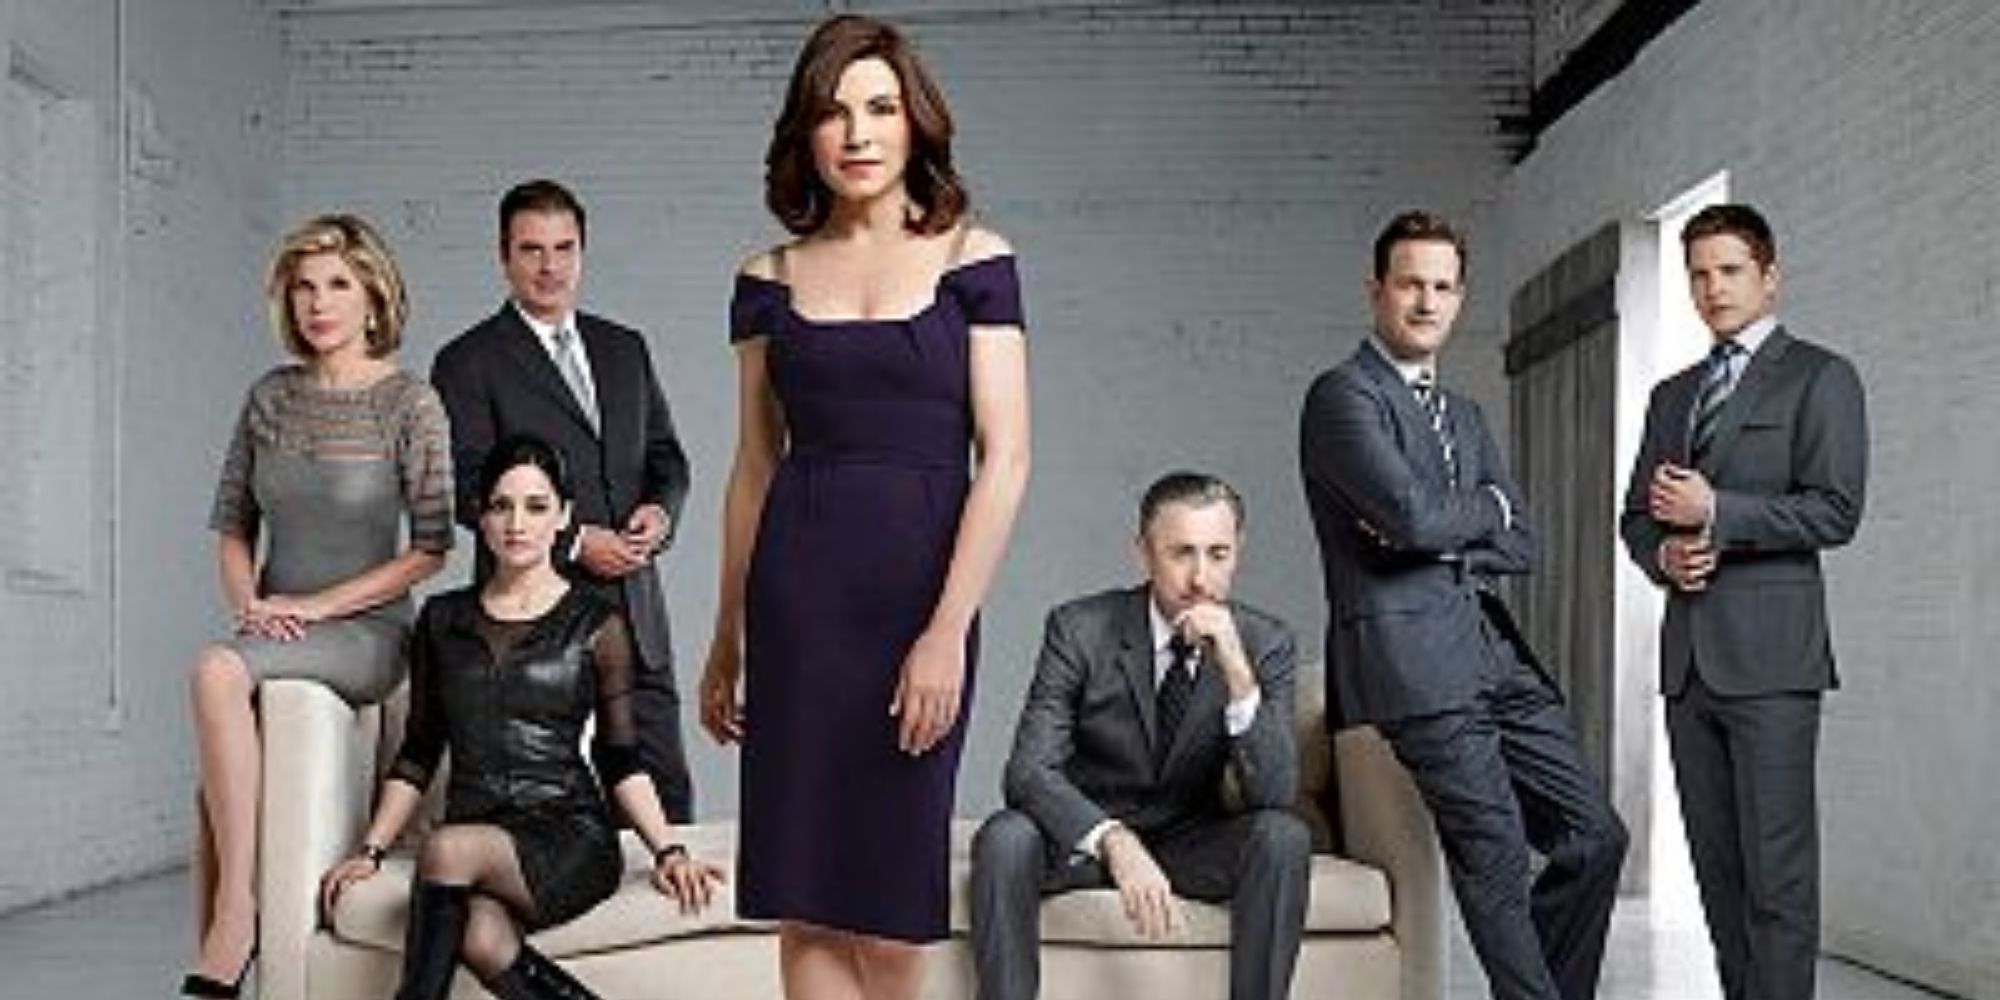 Panjabischoolgirlsex - The Good Wife' Cast: Where Are They Now